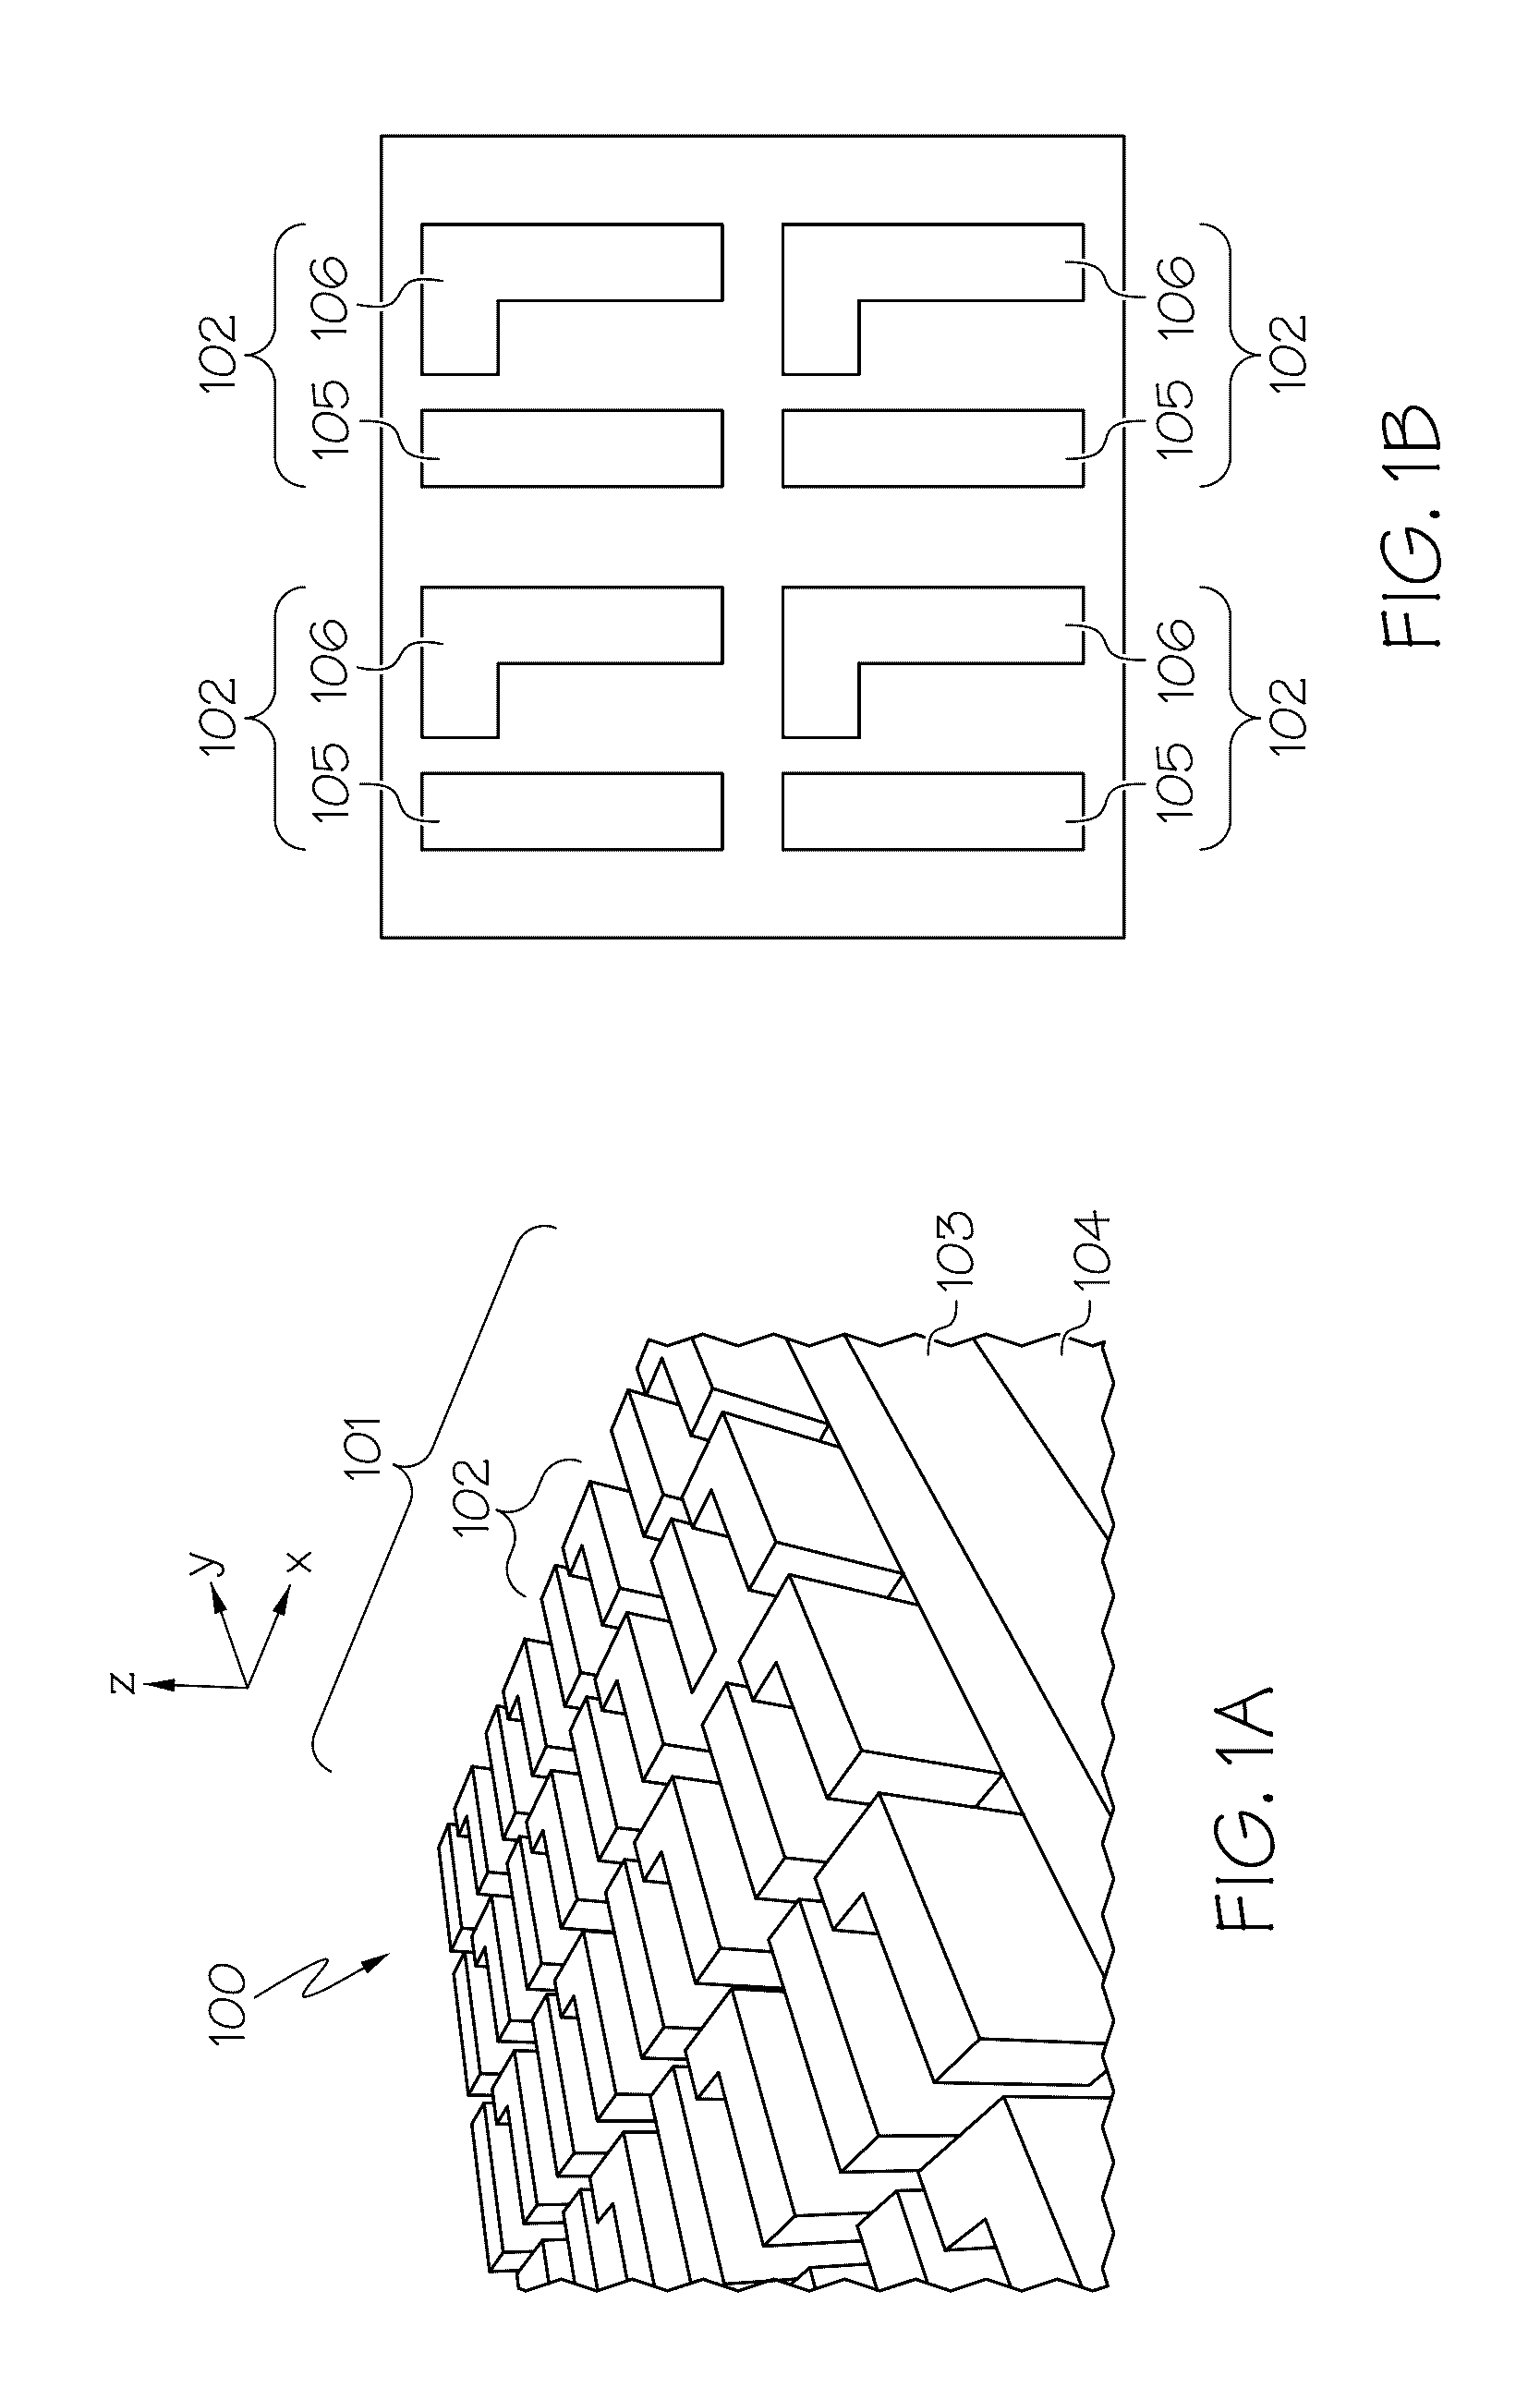 Tag with a non-metallic metasurface that converts incident light into elliptically or circularly polarized light regardless of polarization state of the incident light